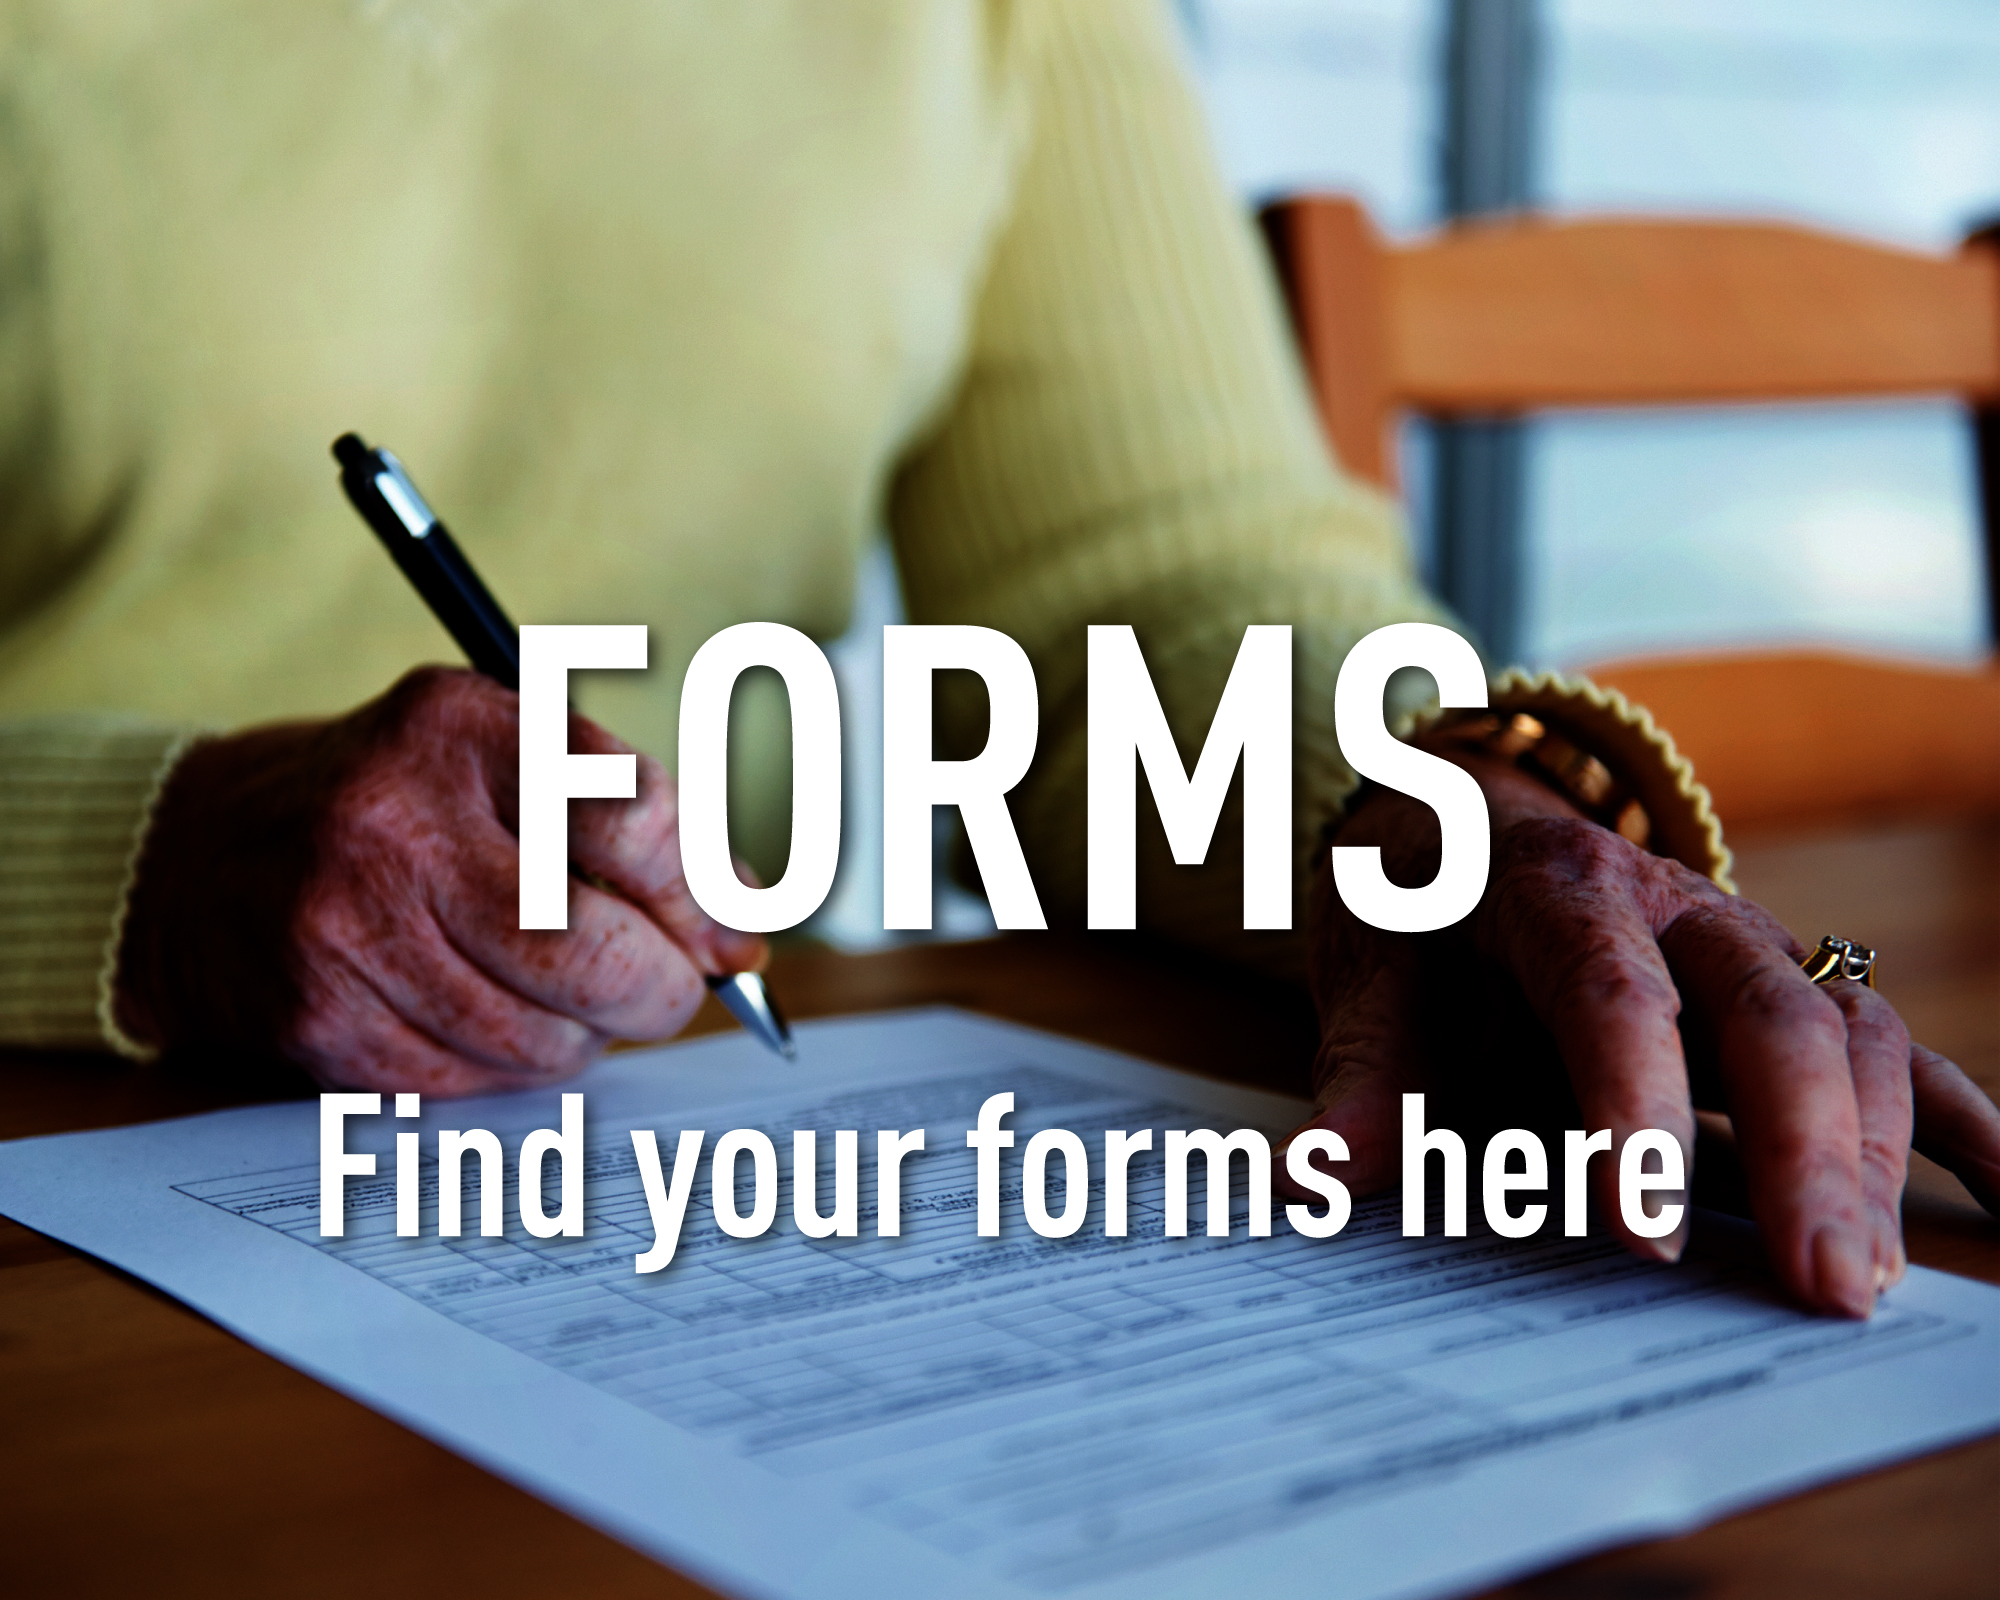 Forms. Find your forms here.